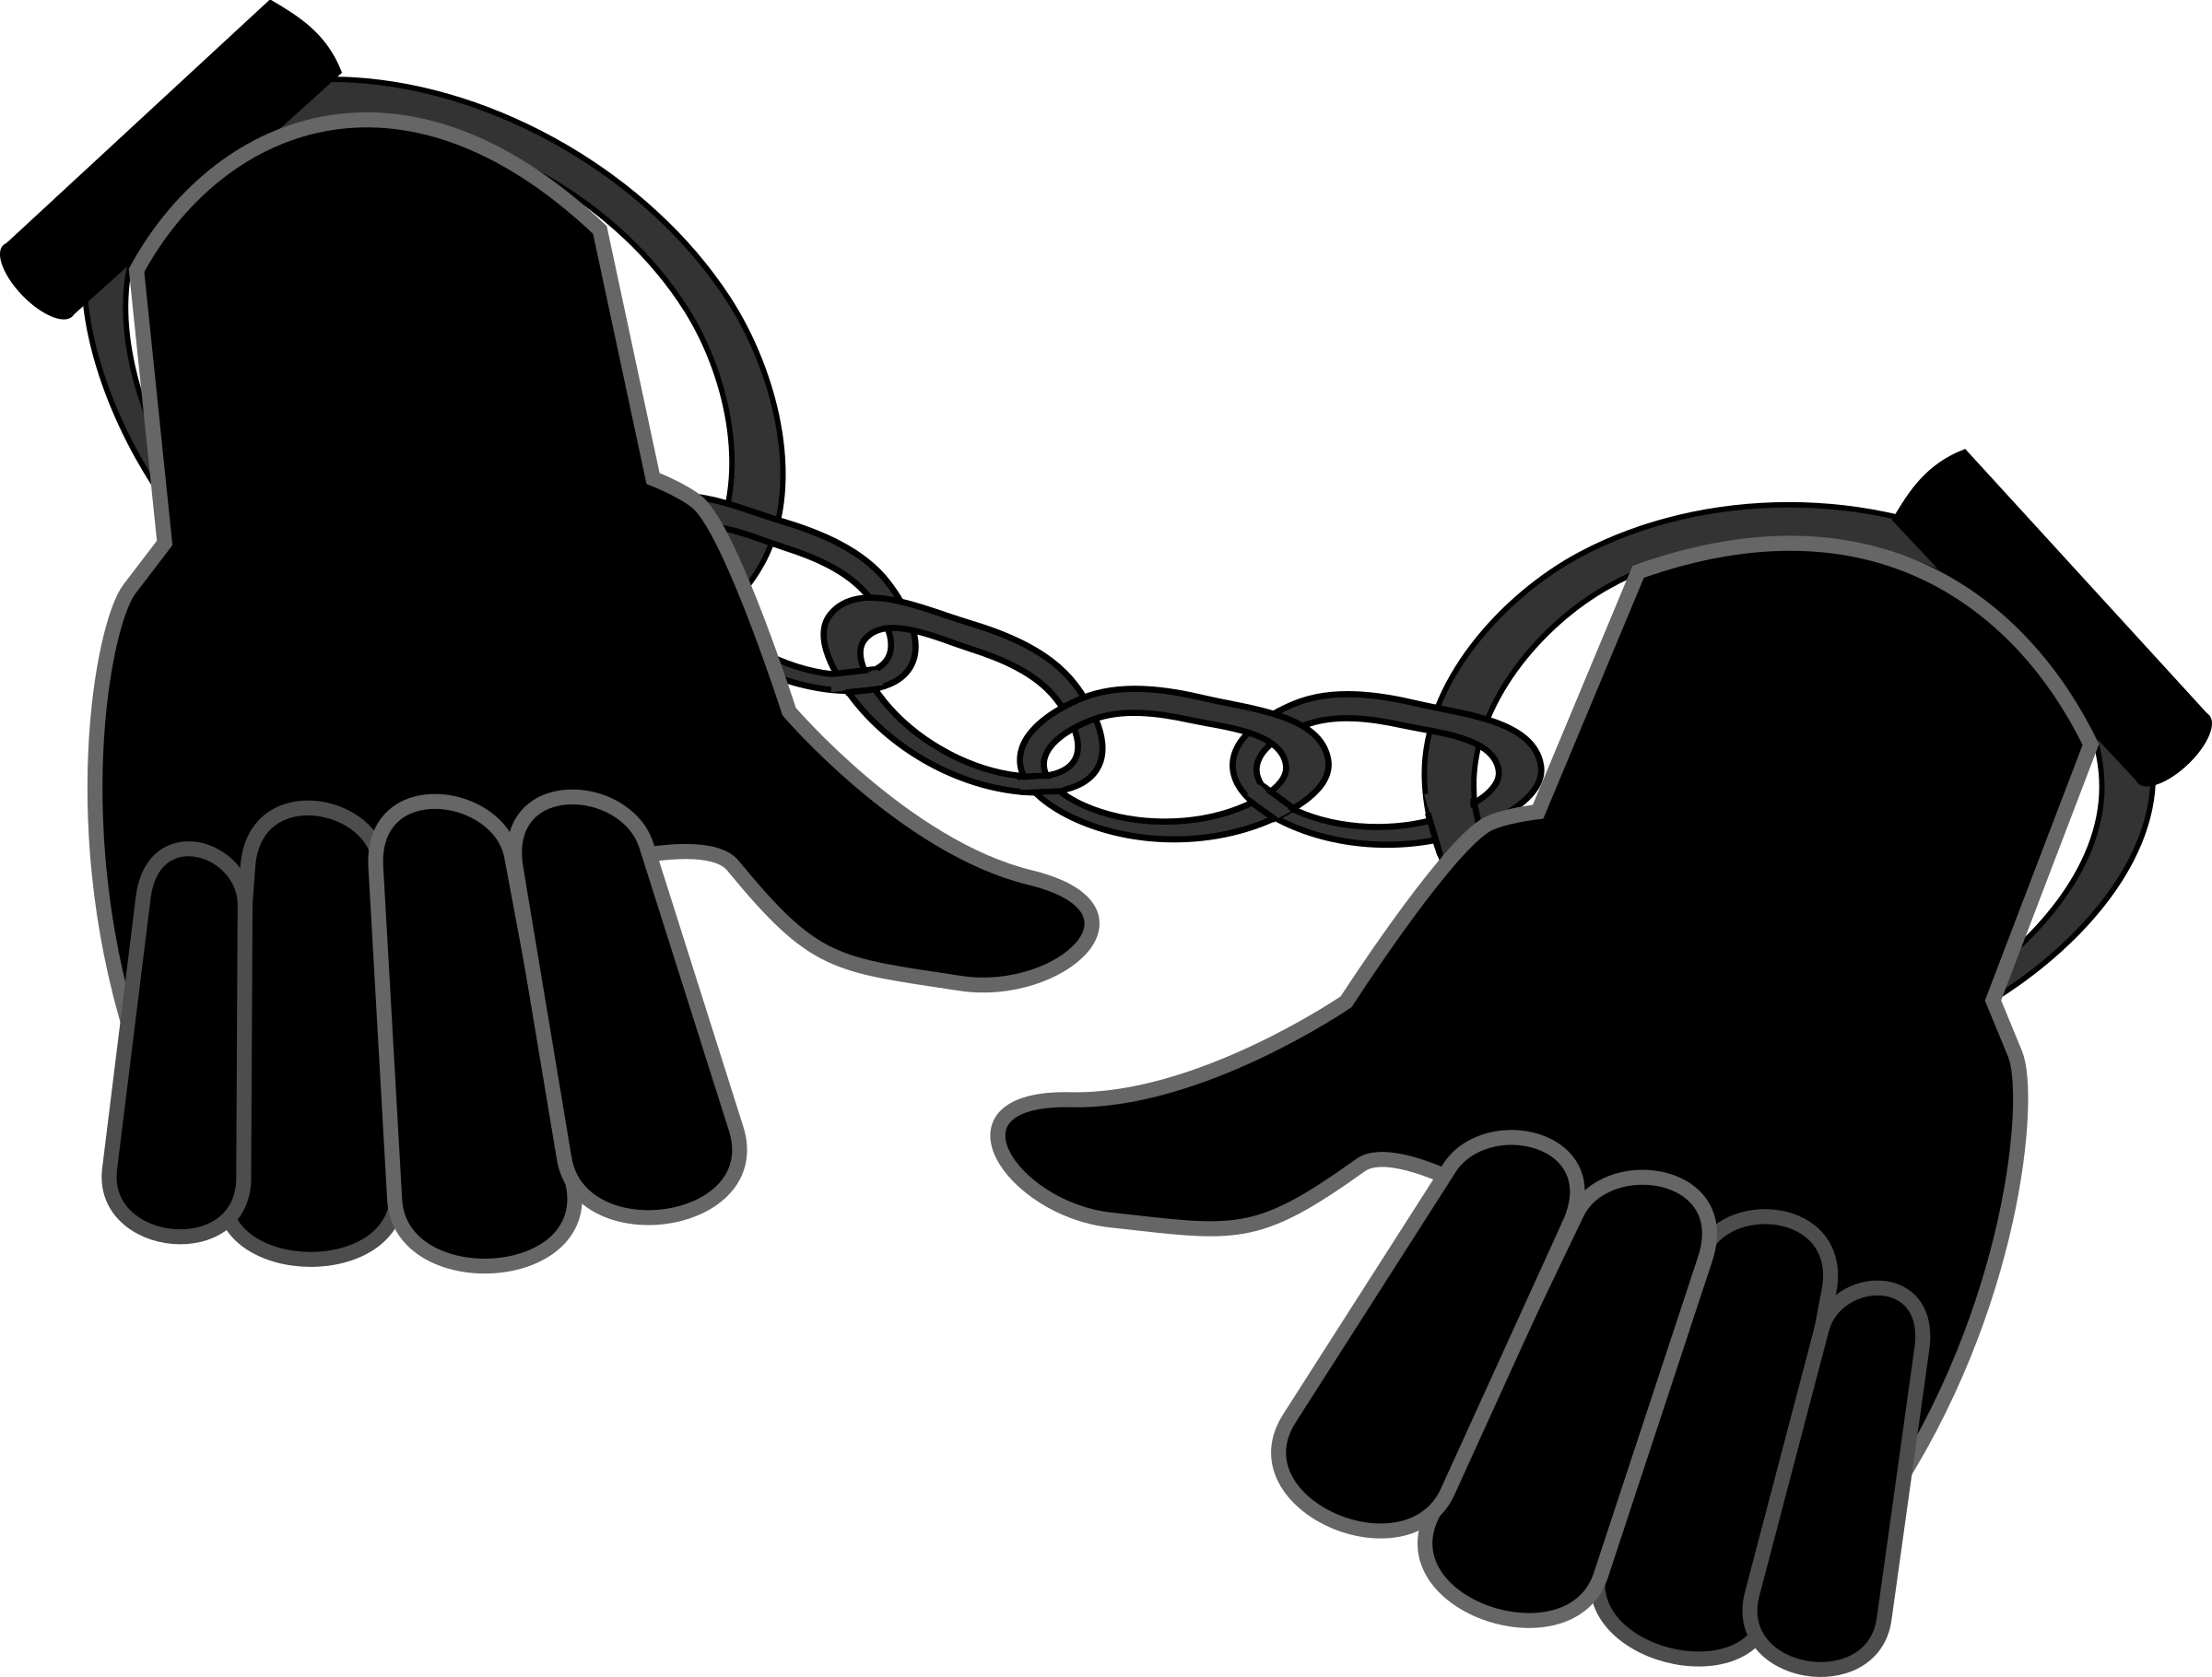 Free Hand Cuffs Cliparts, Download Free Hand Cuffs Cliparts png images